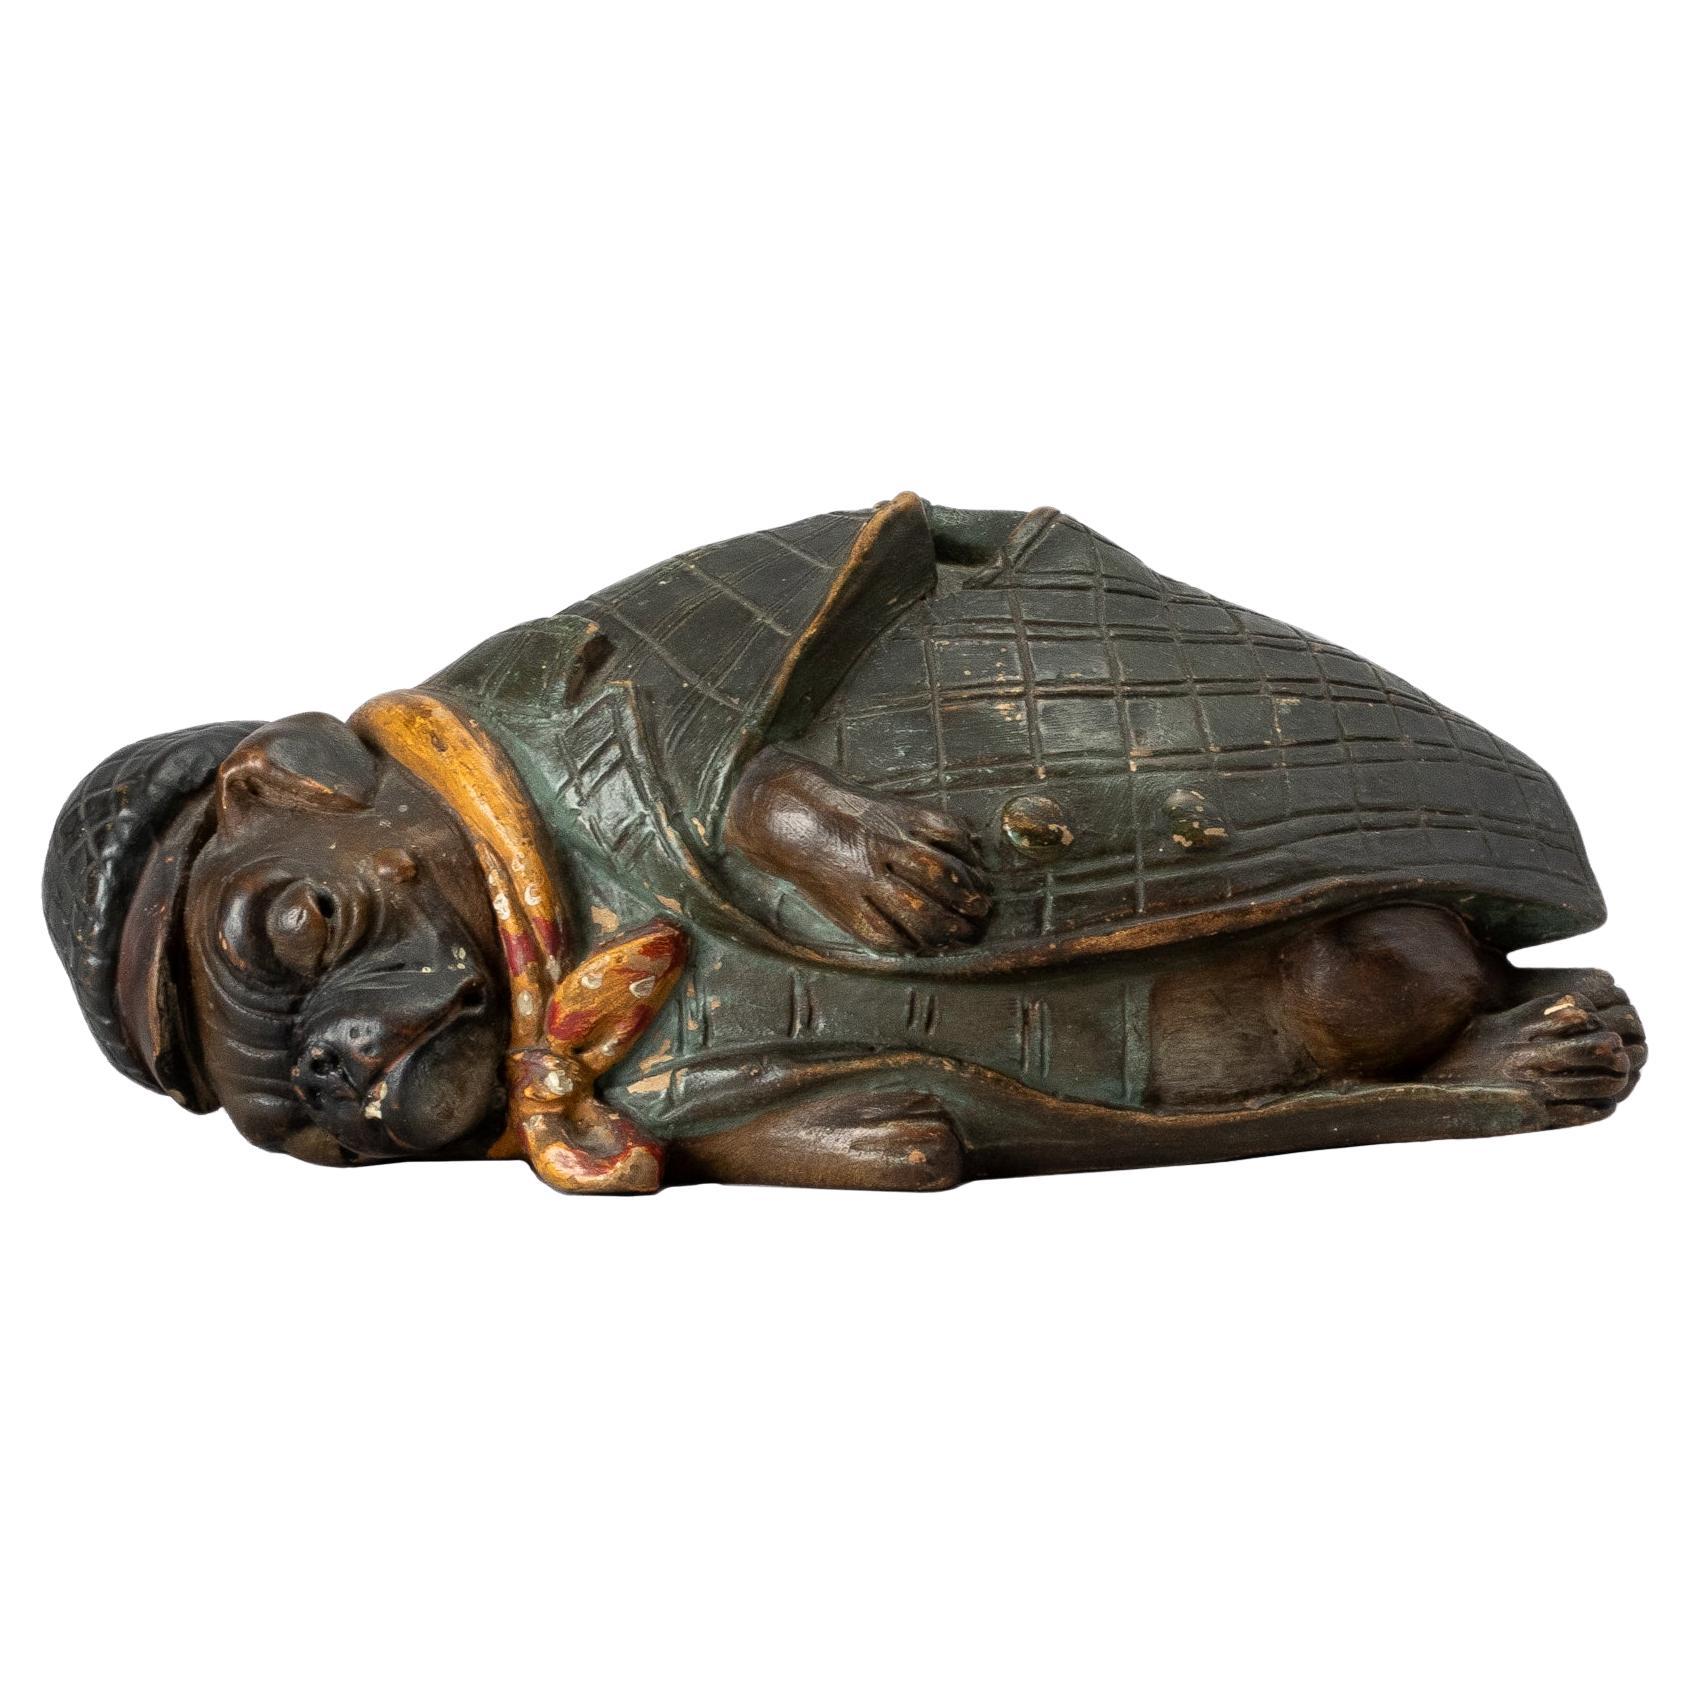 Bernhard Bloch Terracotta Sculpture of a Tipsy Dog in Checkered Trenchcoat